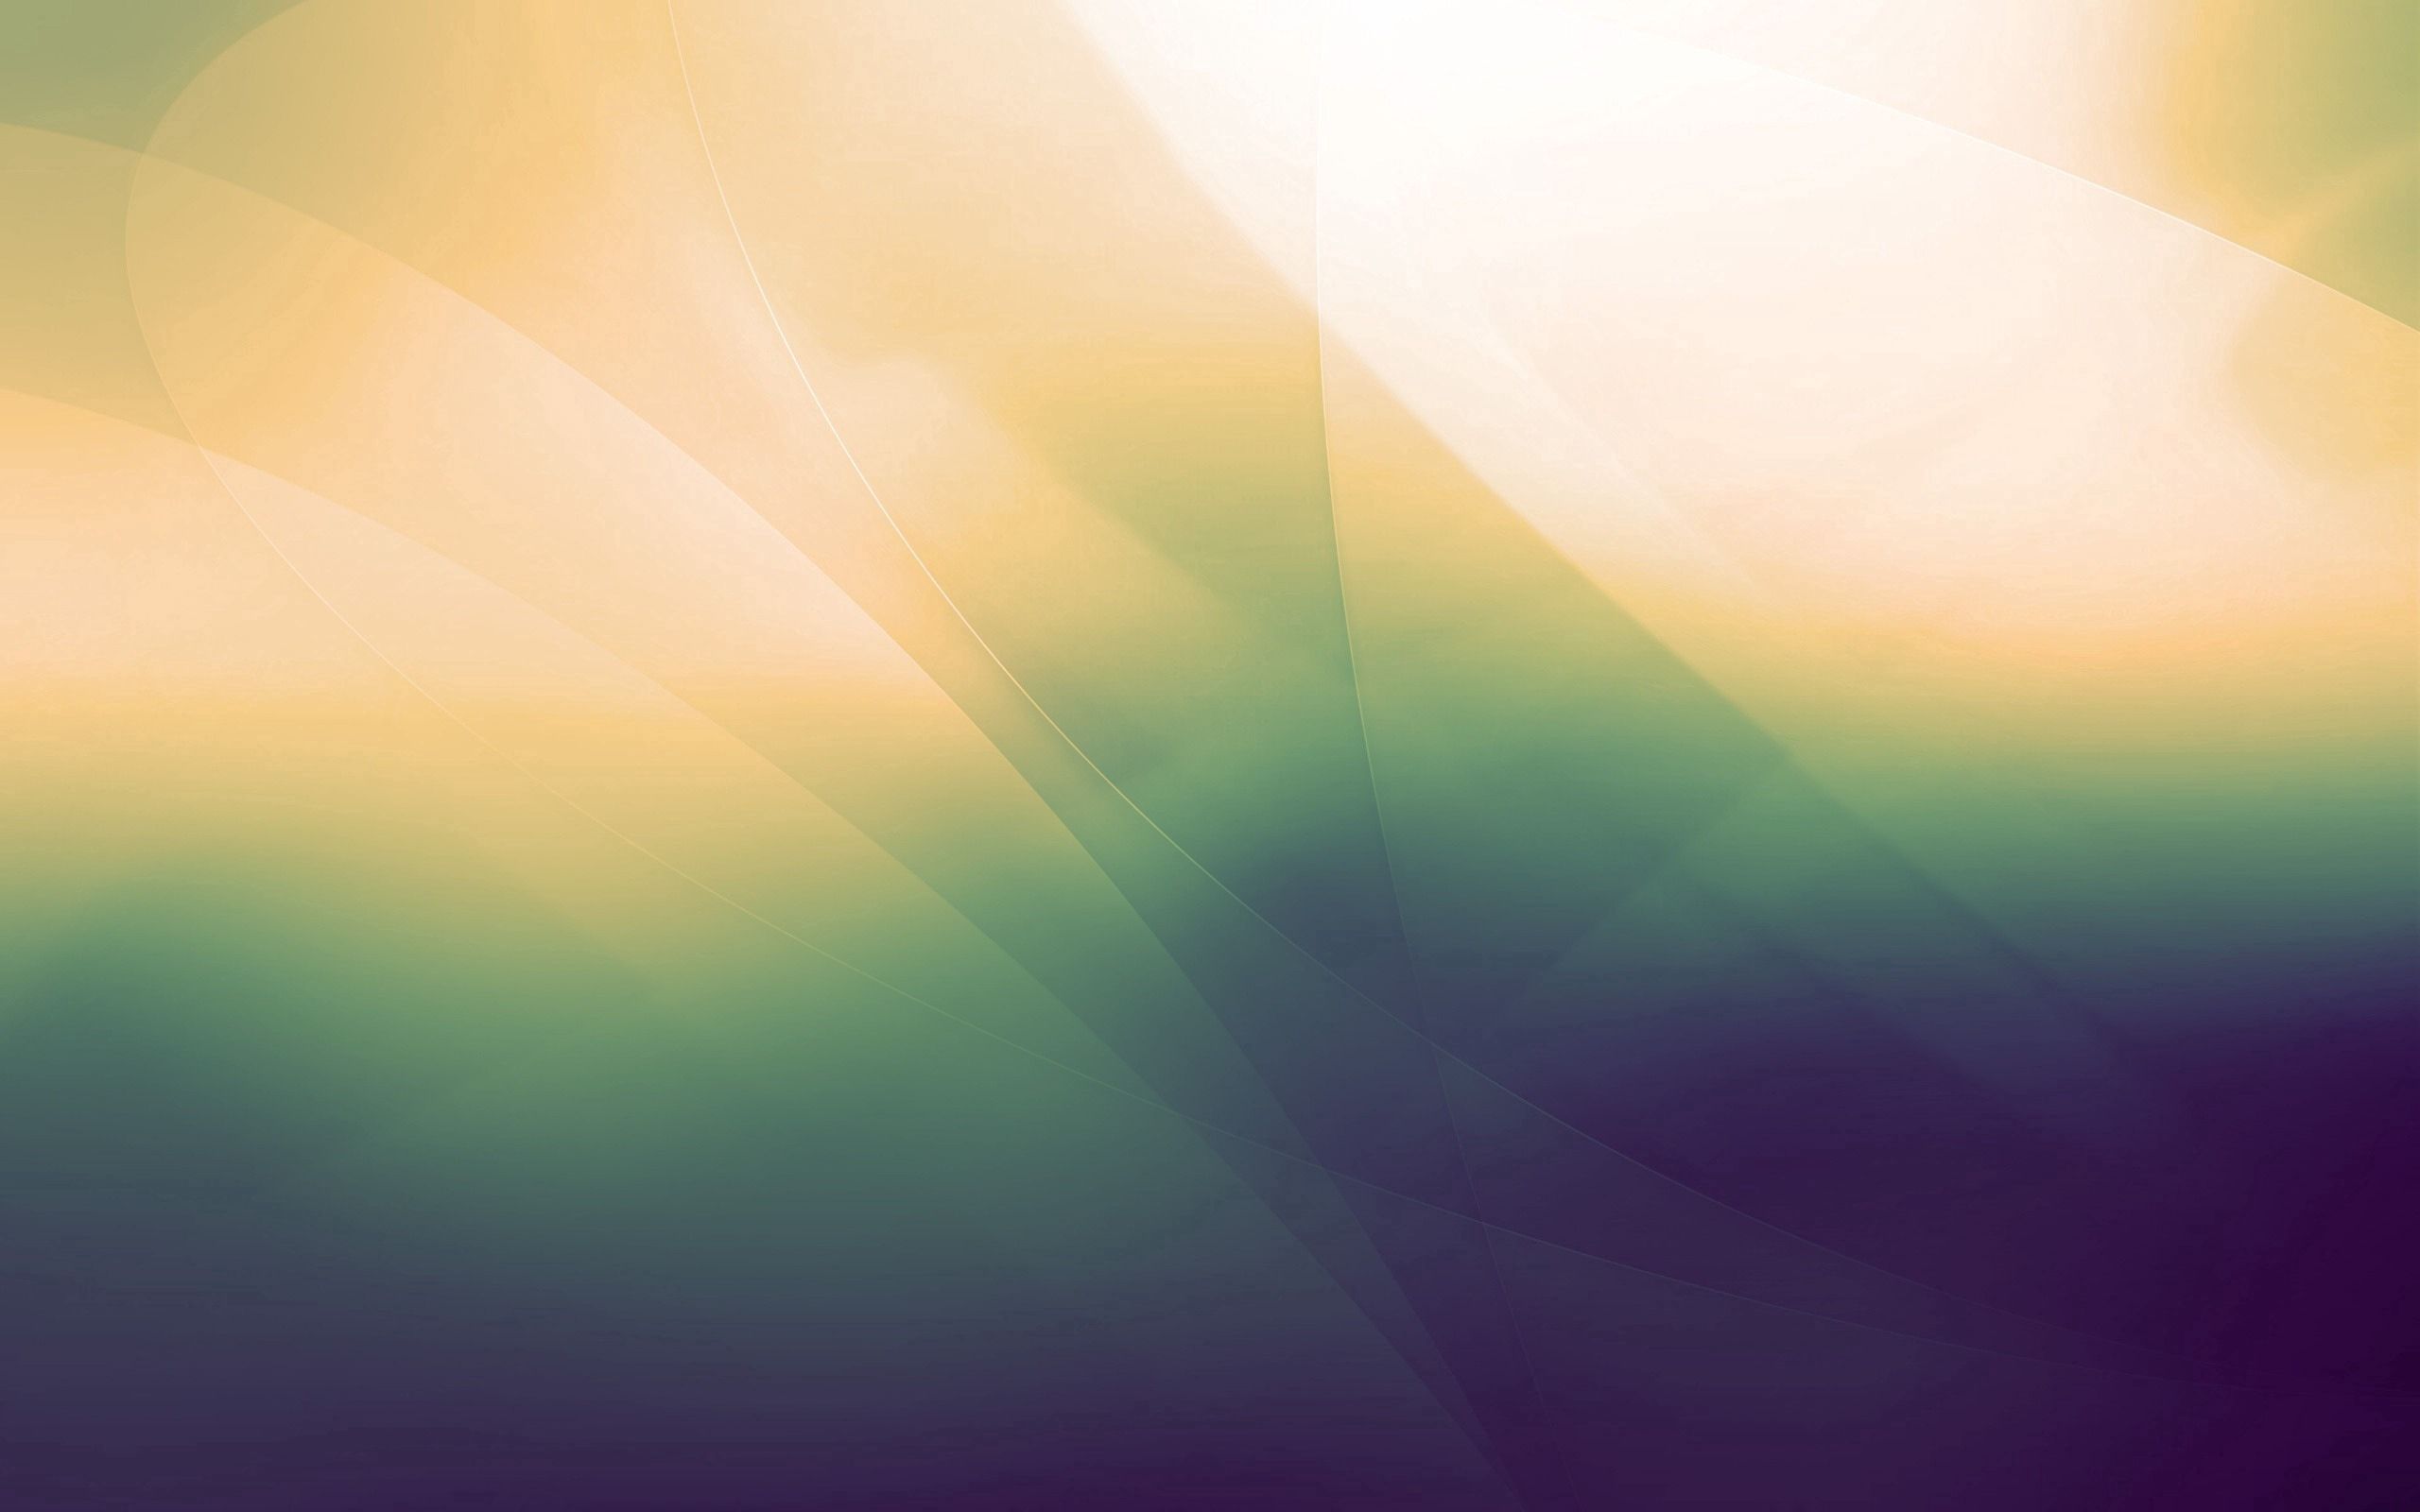 faded, abstract, shine, light, blur, smooth, paints 2160p